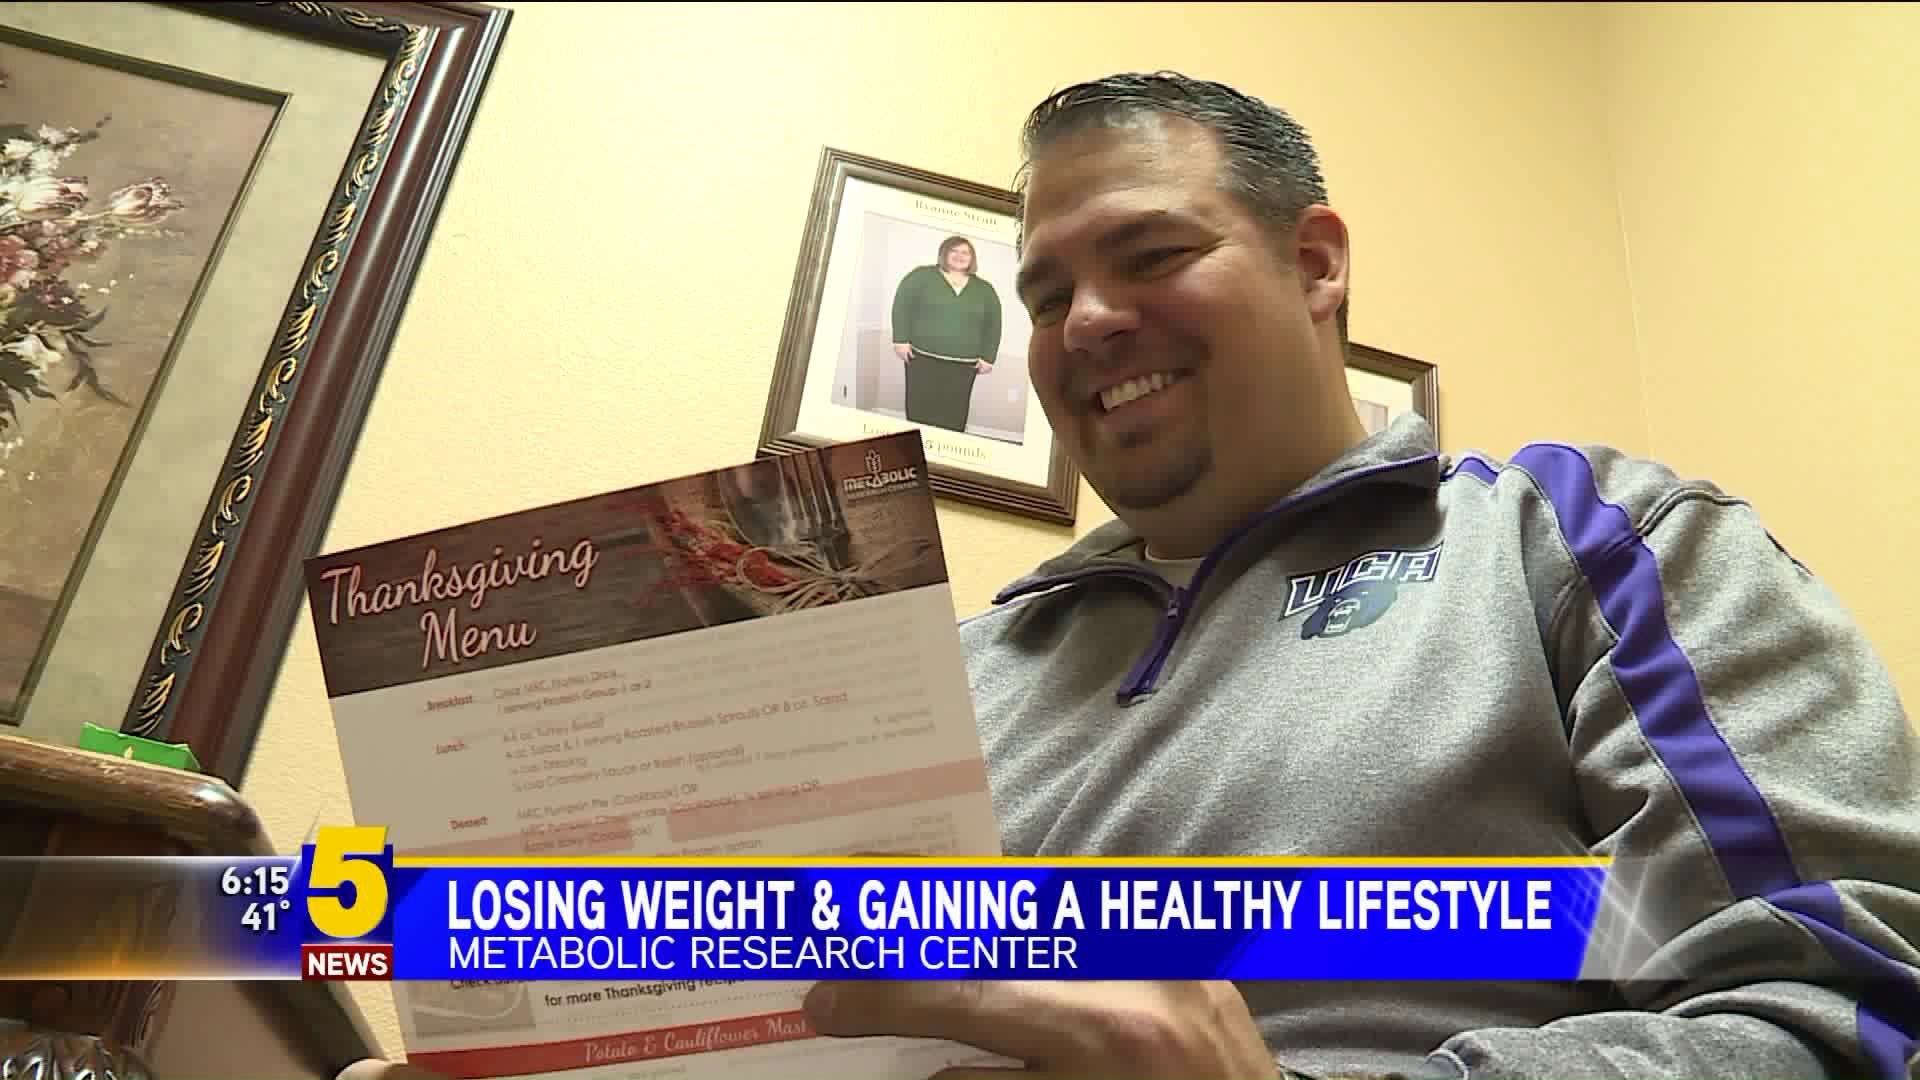 Metabolic Research Center - Beating the Holiday Cravings - Phase 10